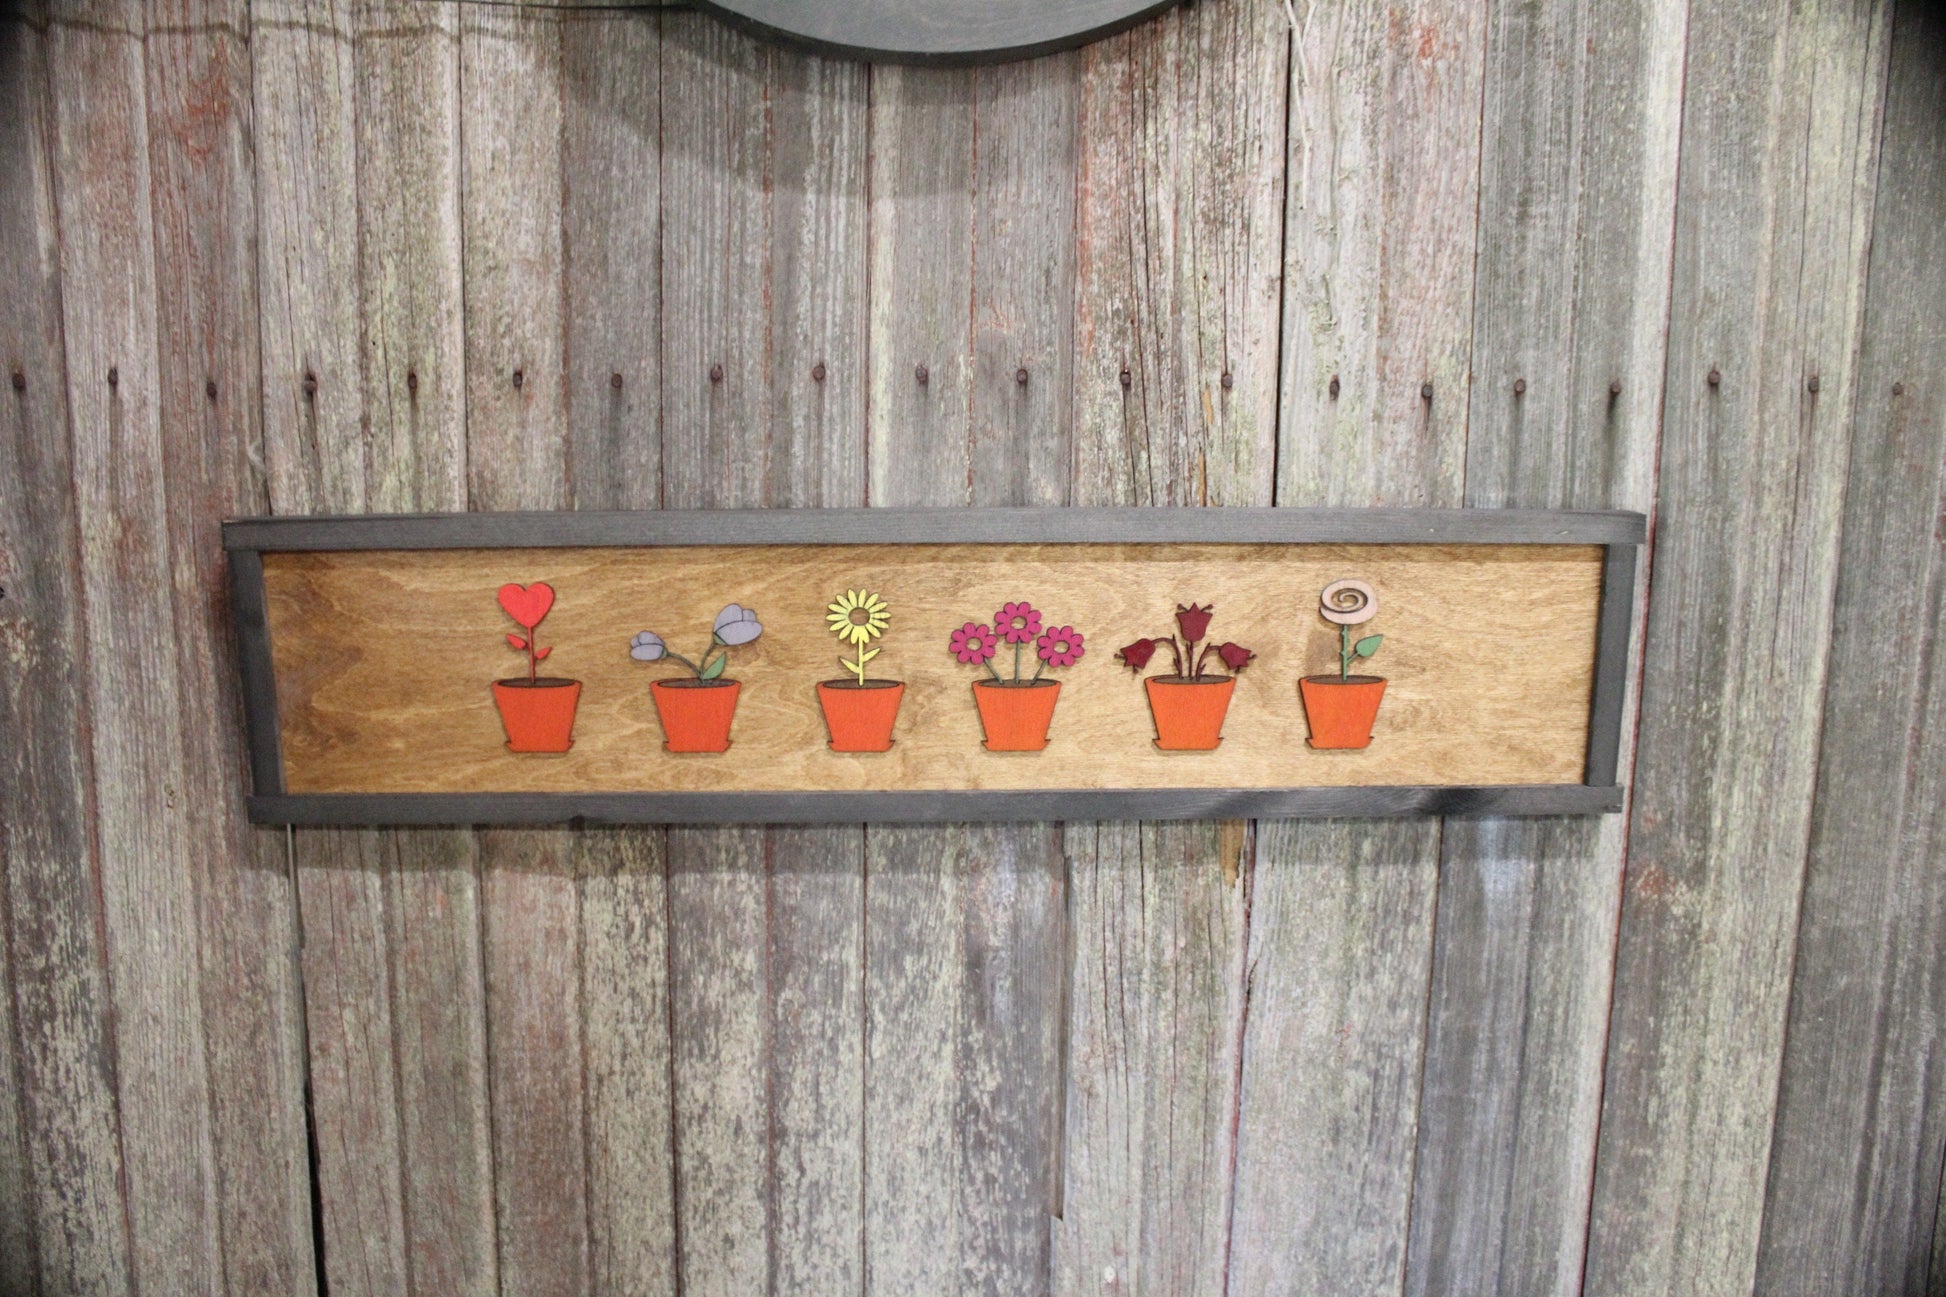 Flower Pot Flowers Floral Wood Décor Cartoon Wall Hanging Country Farmhouse Shabby Chic 3D Raised Image Daisy Heart Bloom Rustic Greenhouse